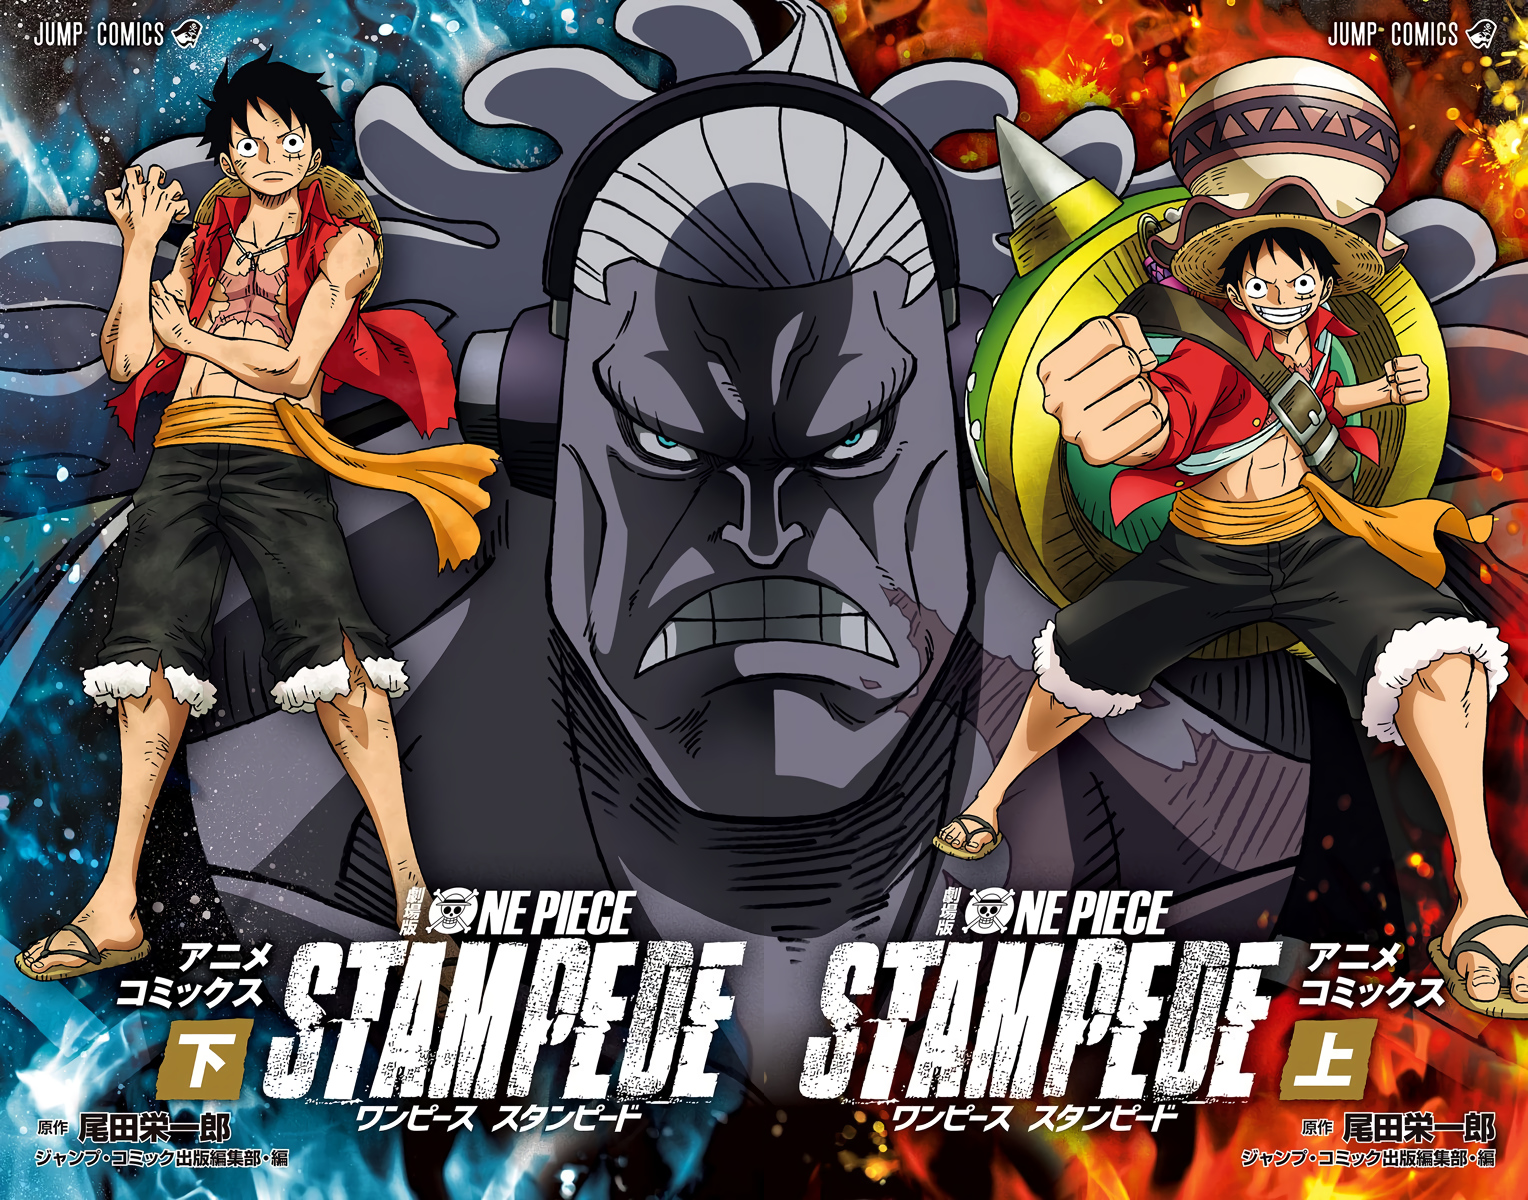 ONE PIECE STAMPEDE  page 2 of 9 - Zerochan Anime Image Board